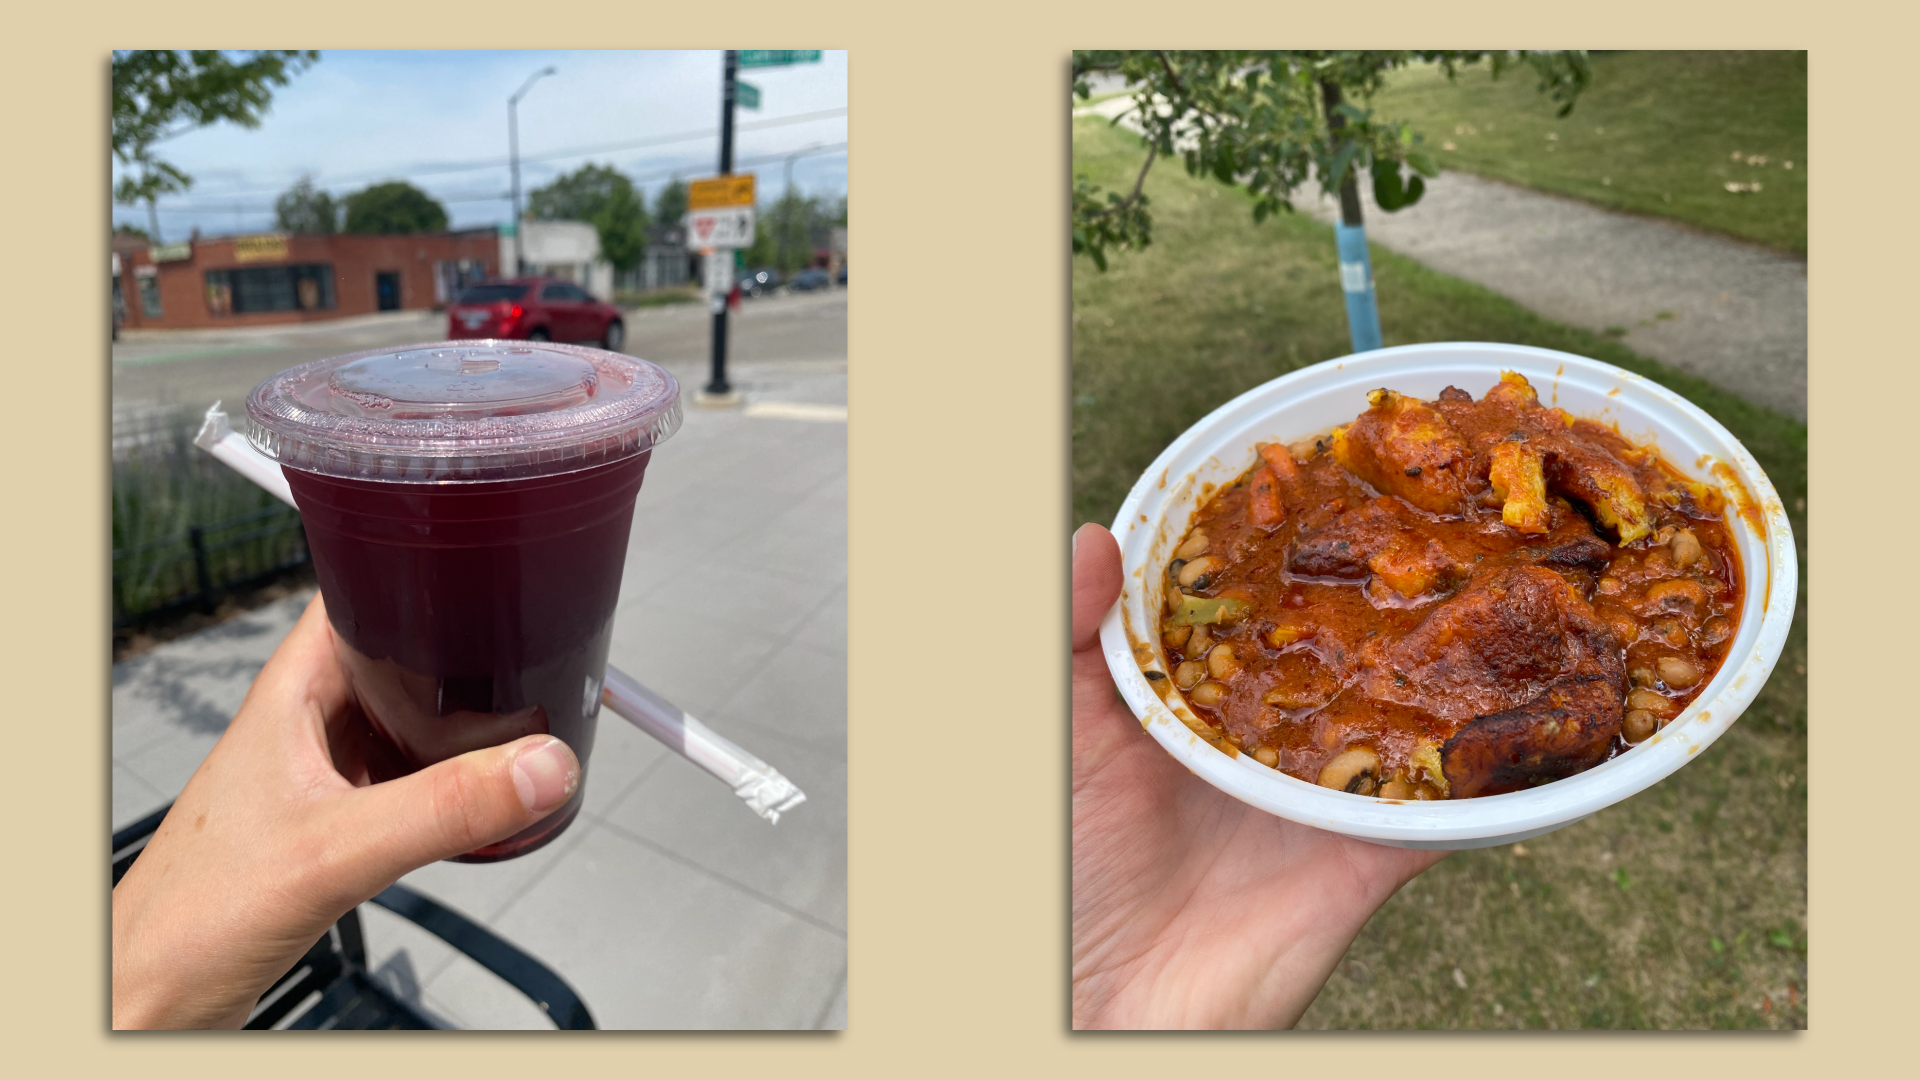 Two images show a burgundy-colored juice and a bowl of stew.